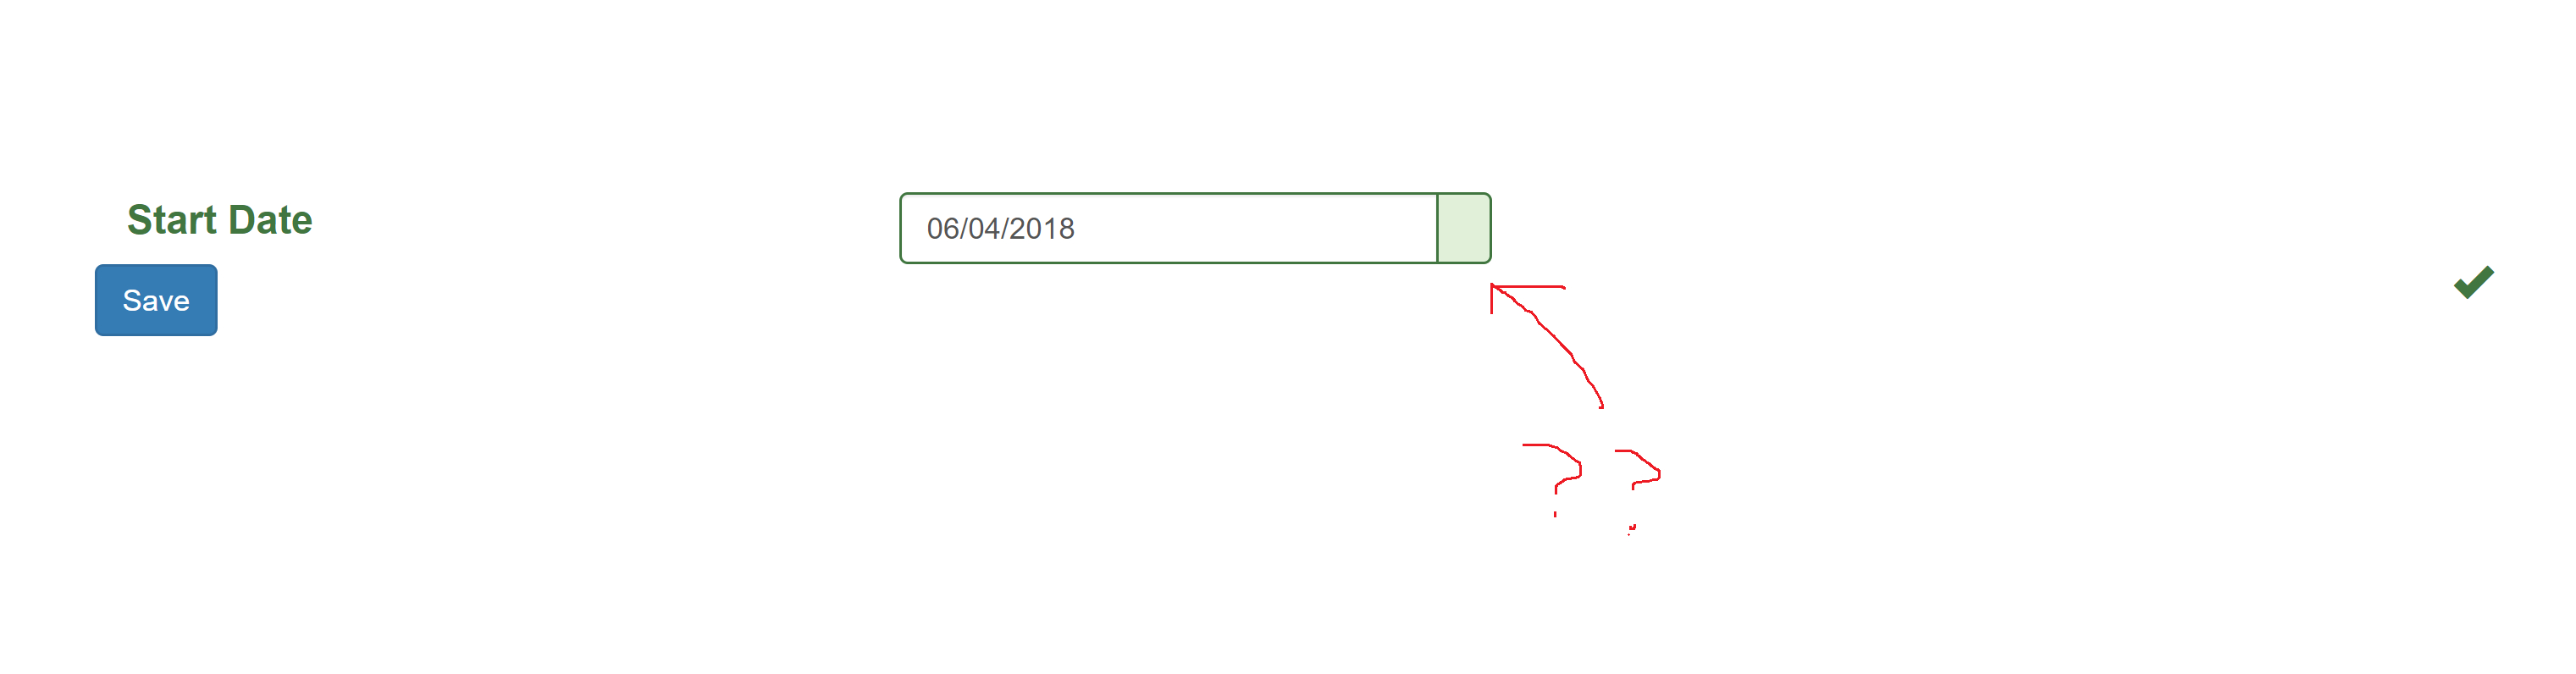 Jquery Datepicker Glyphicon Icon Missing  Stack Overflow within Glyphicon-Calendar Not Showing